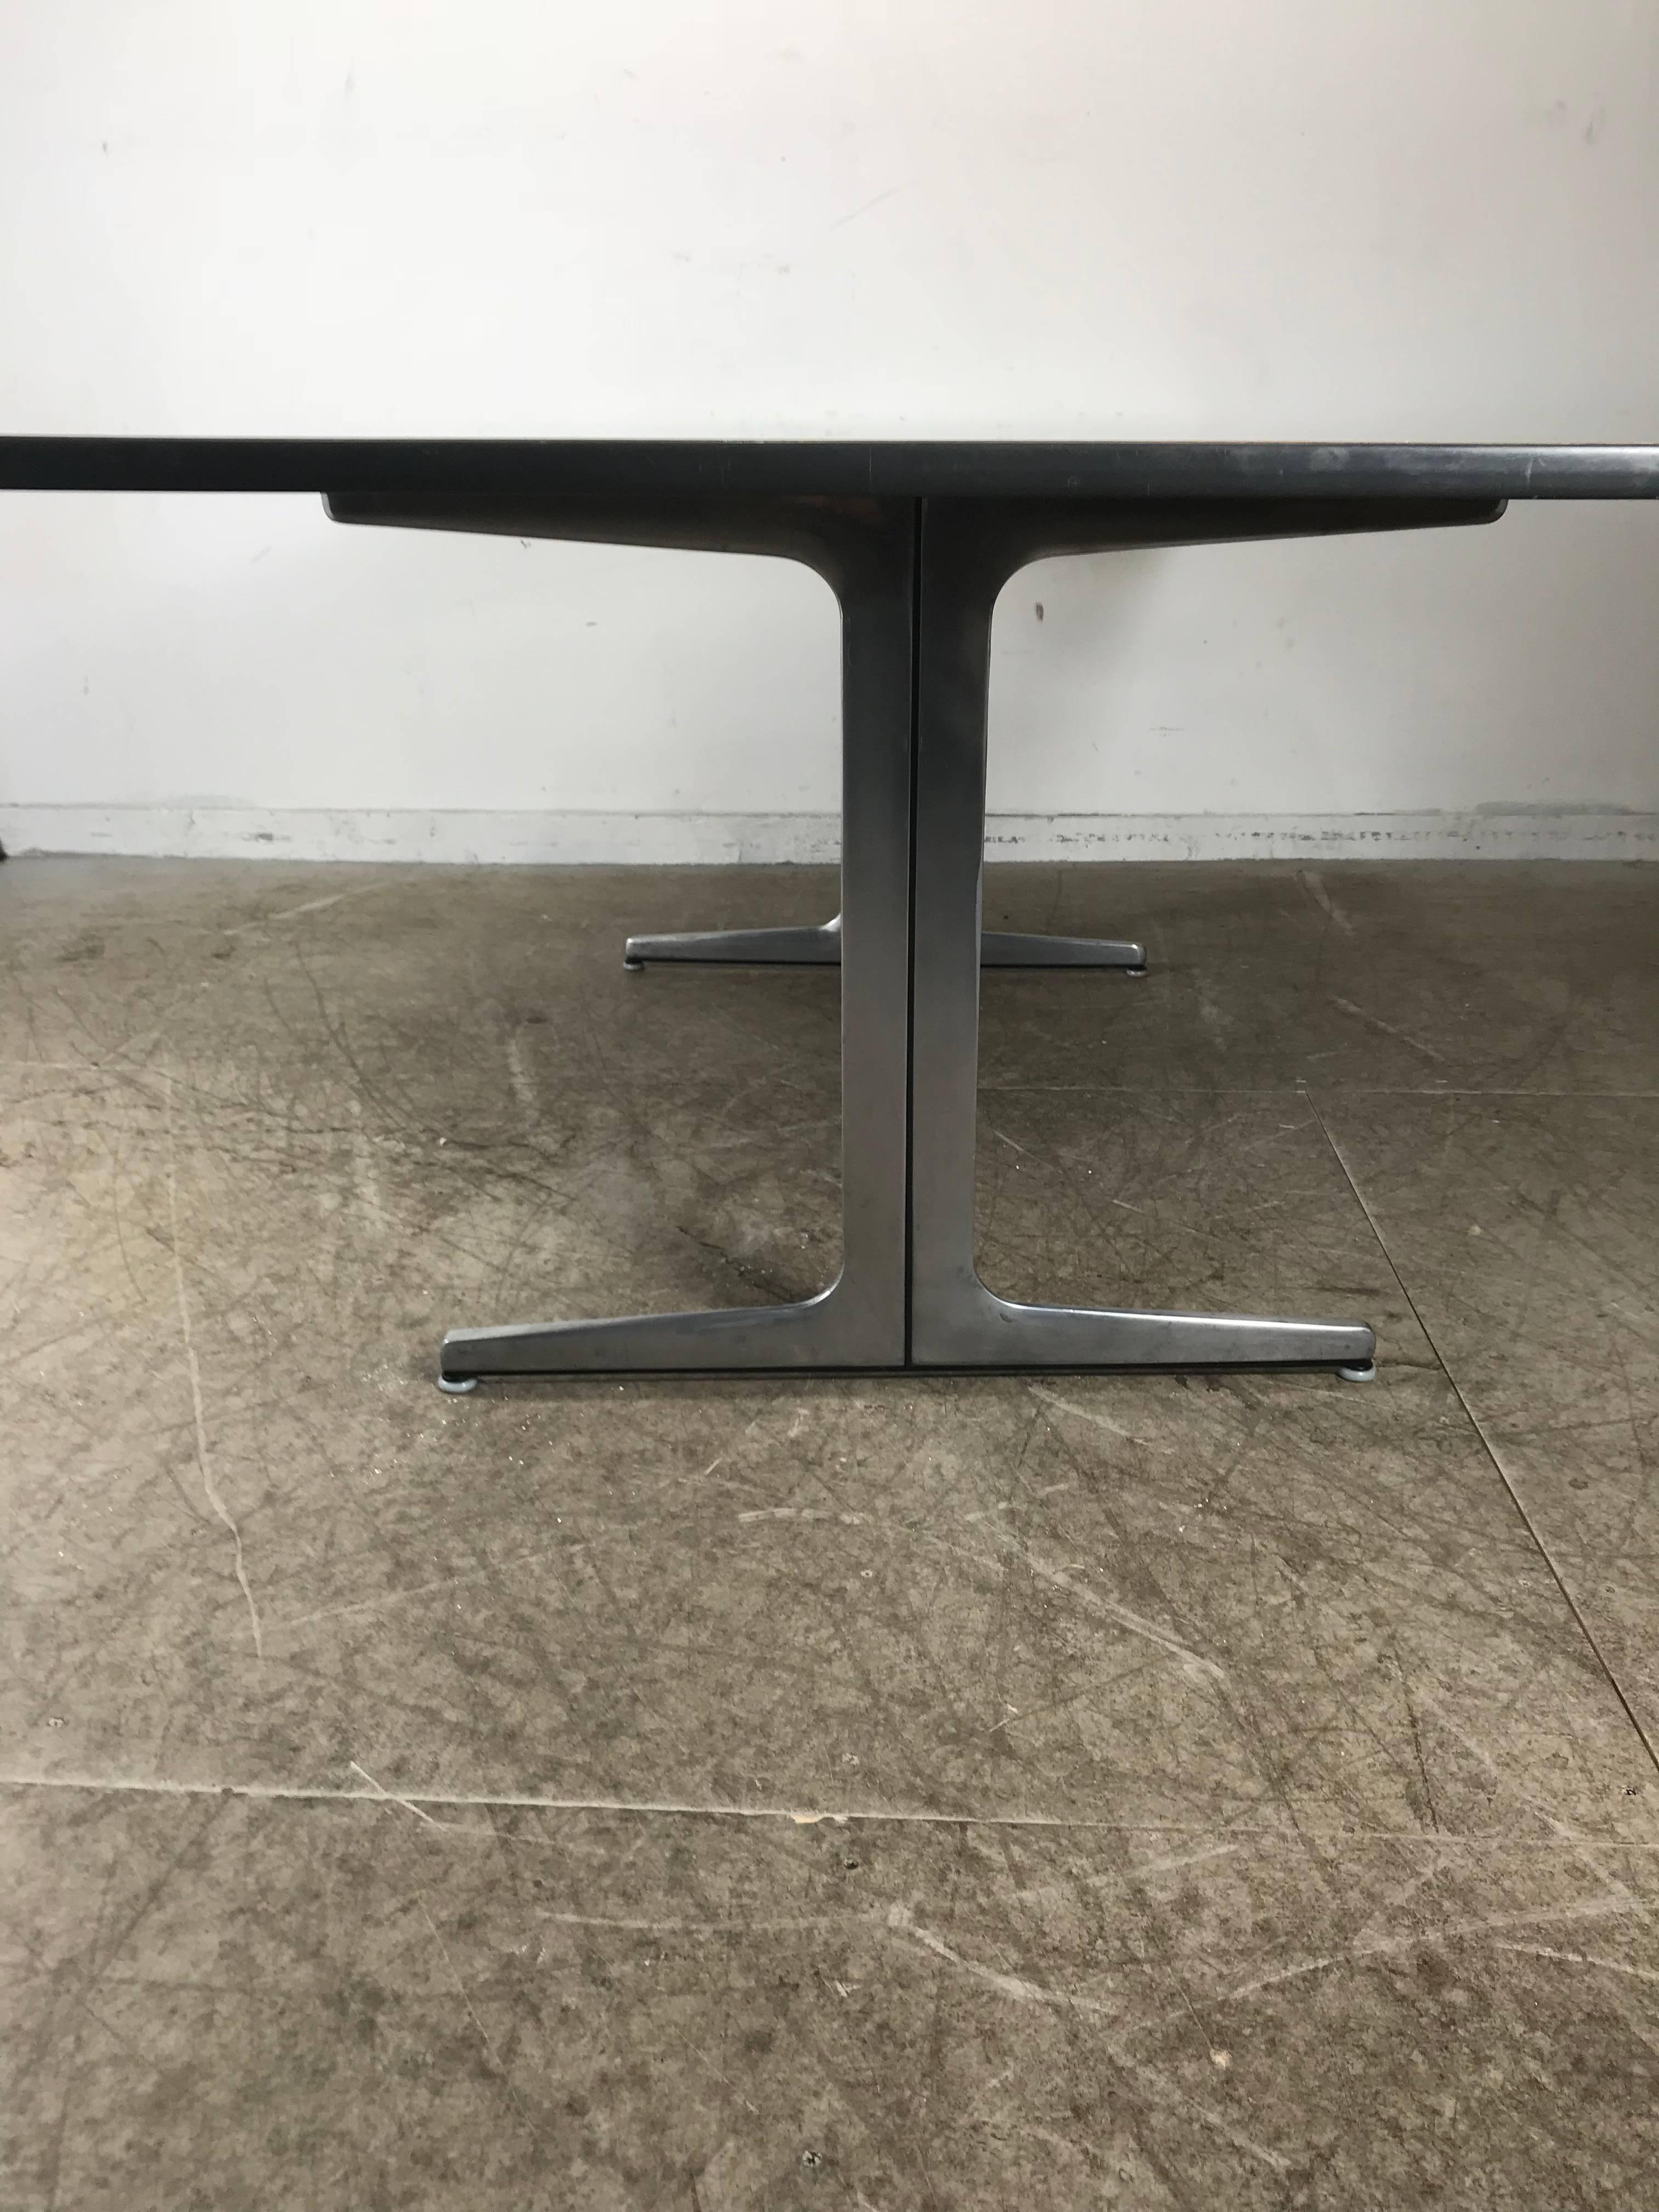 Aluminum Elusive Modernist Action Office Desk or Table by George Nelson for Herman Miller For Sale